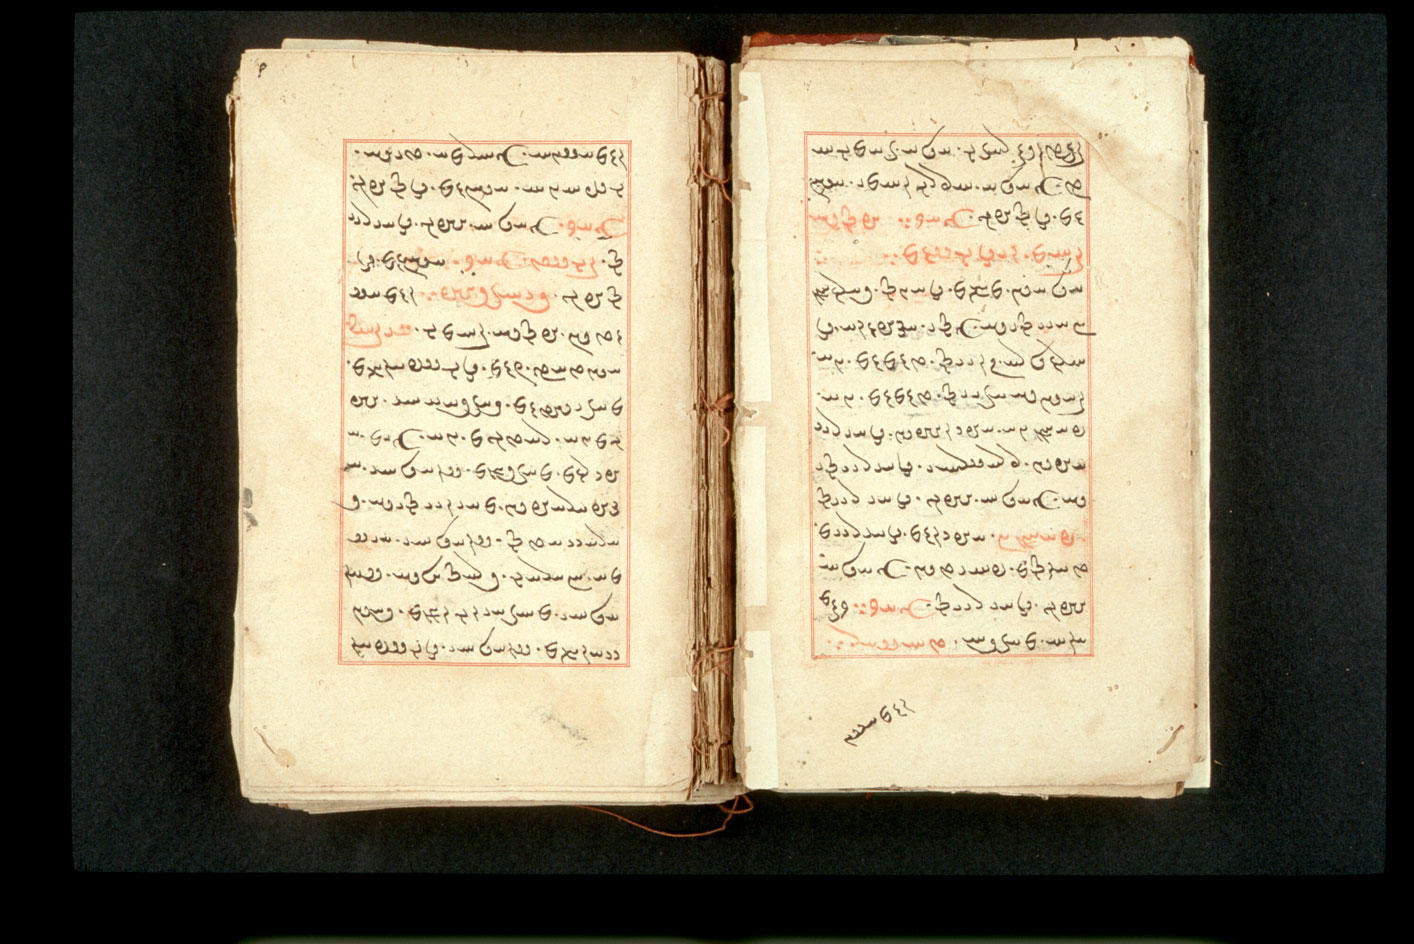 Folios 9v (right) and 10r (left)